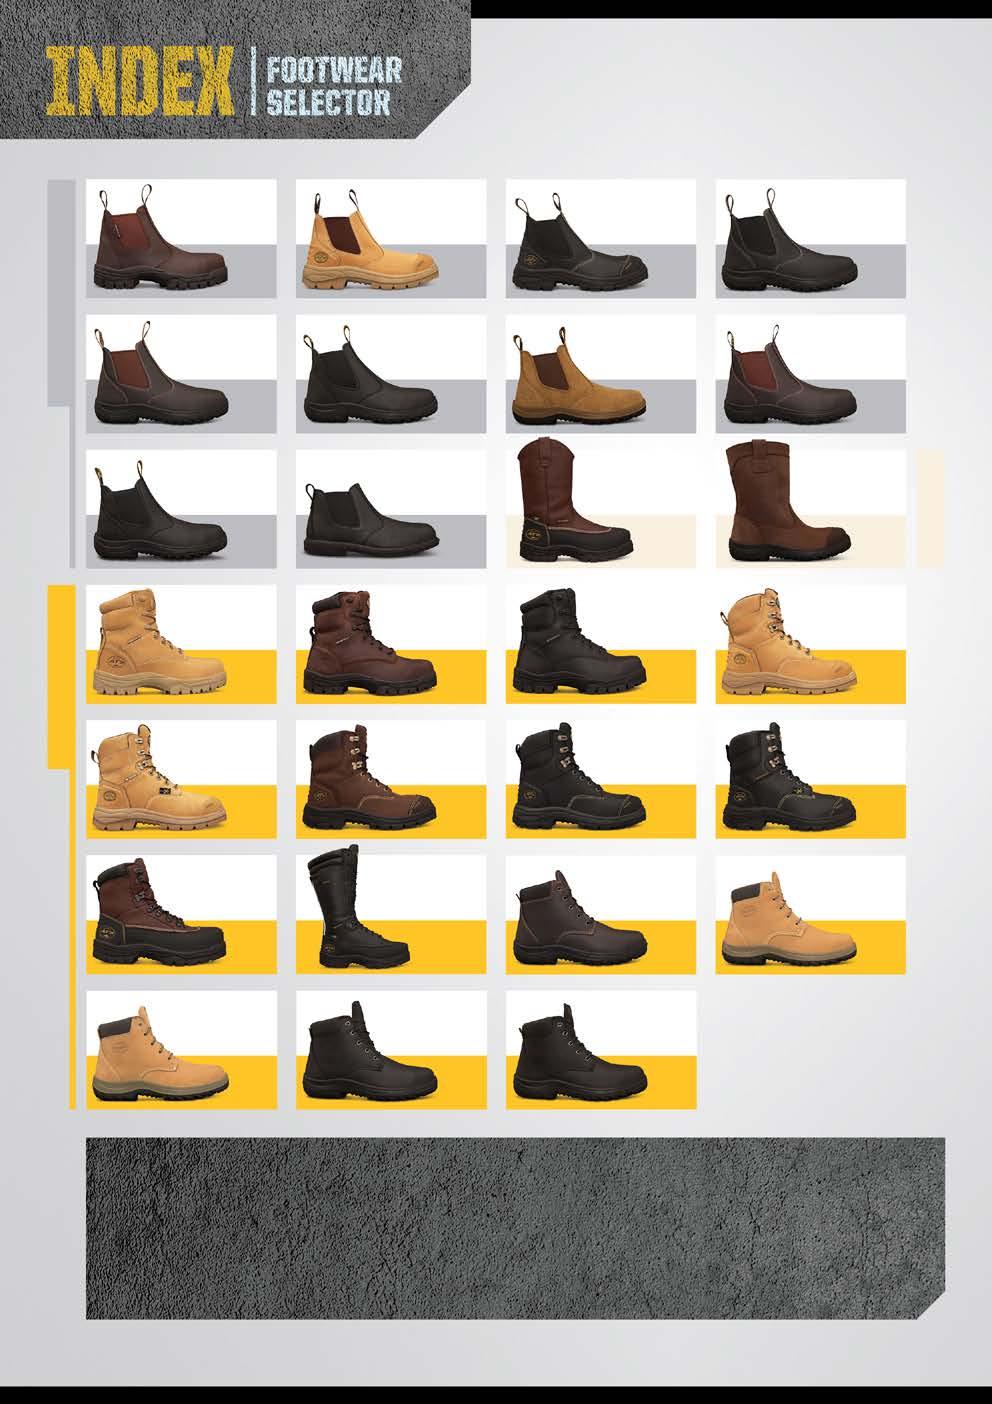 ELASTIC SIDED BOOTS AT 45-627 BROWN ELASTIC SIDED BOOT (NON METALLIC) P5 WB 26-626 CLARET ELASTIC SIDED BOOT (NON SAFETY) AT 55-322 WHEAT ELASTIC SIDED BOOT WB 34-620 BLACK ELASTIC SIDED BOOT P7 AT